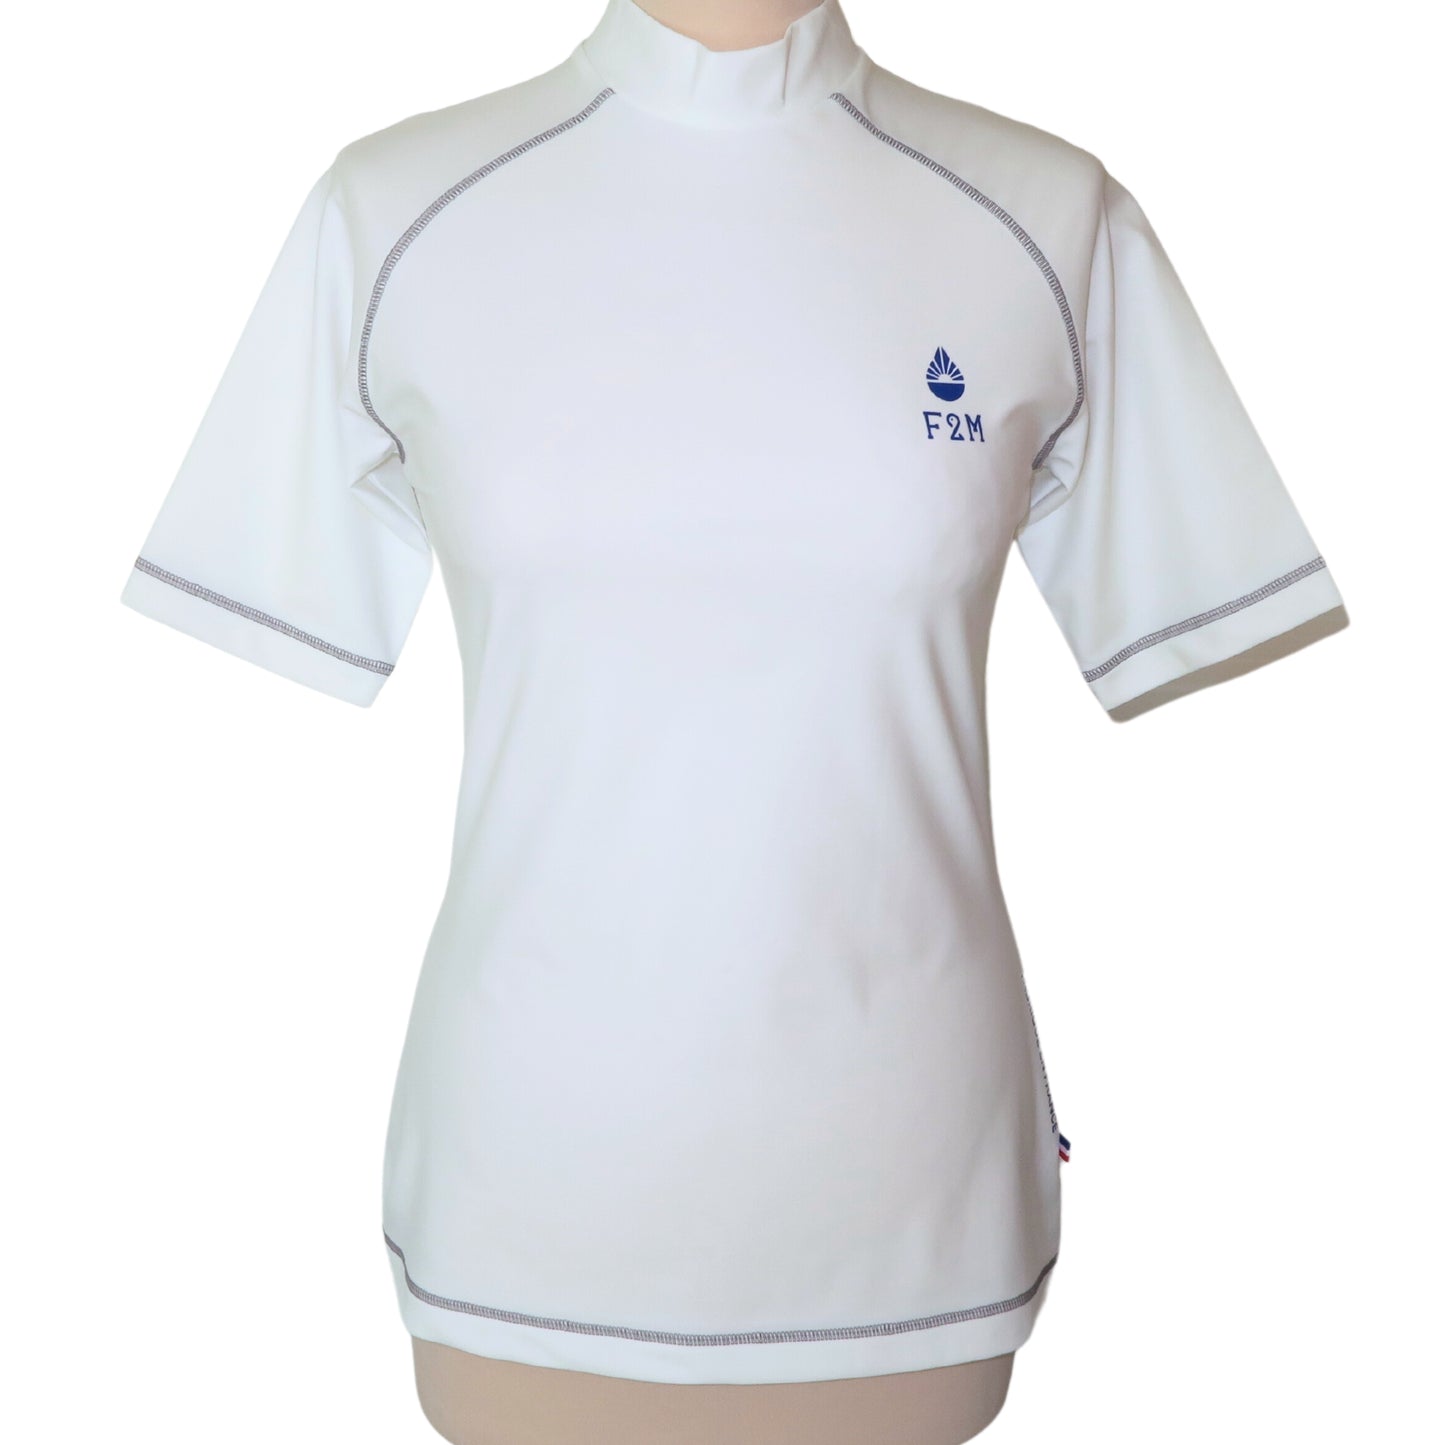 Rashguard UPF50+ durable Made in France manches courtes femme blanc